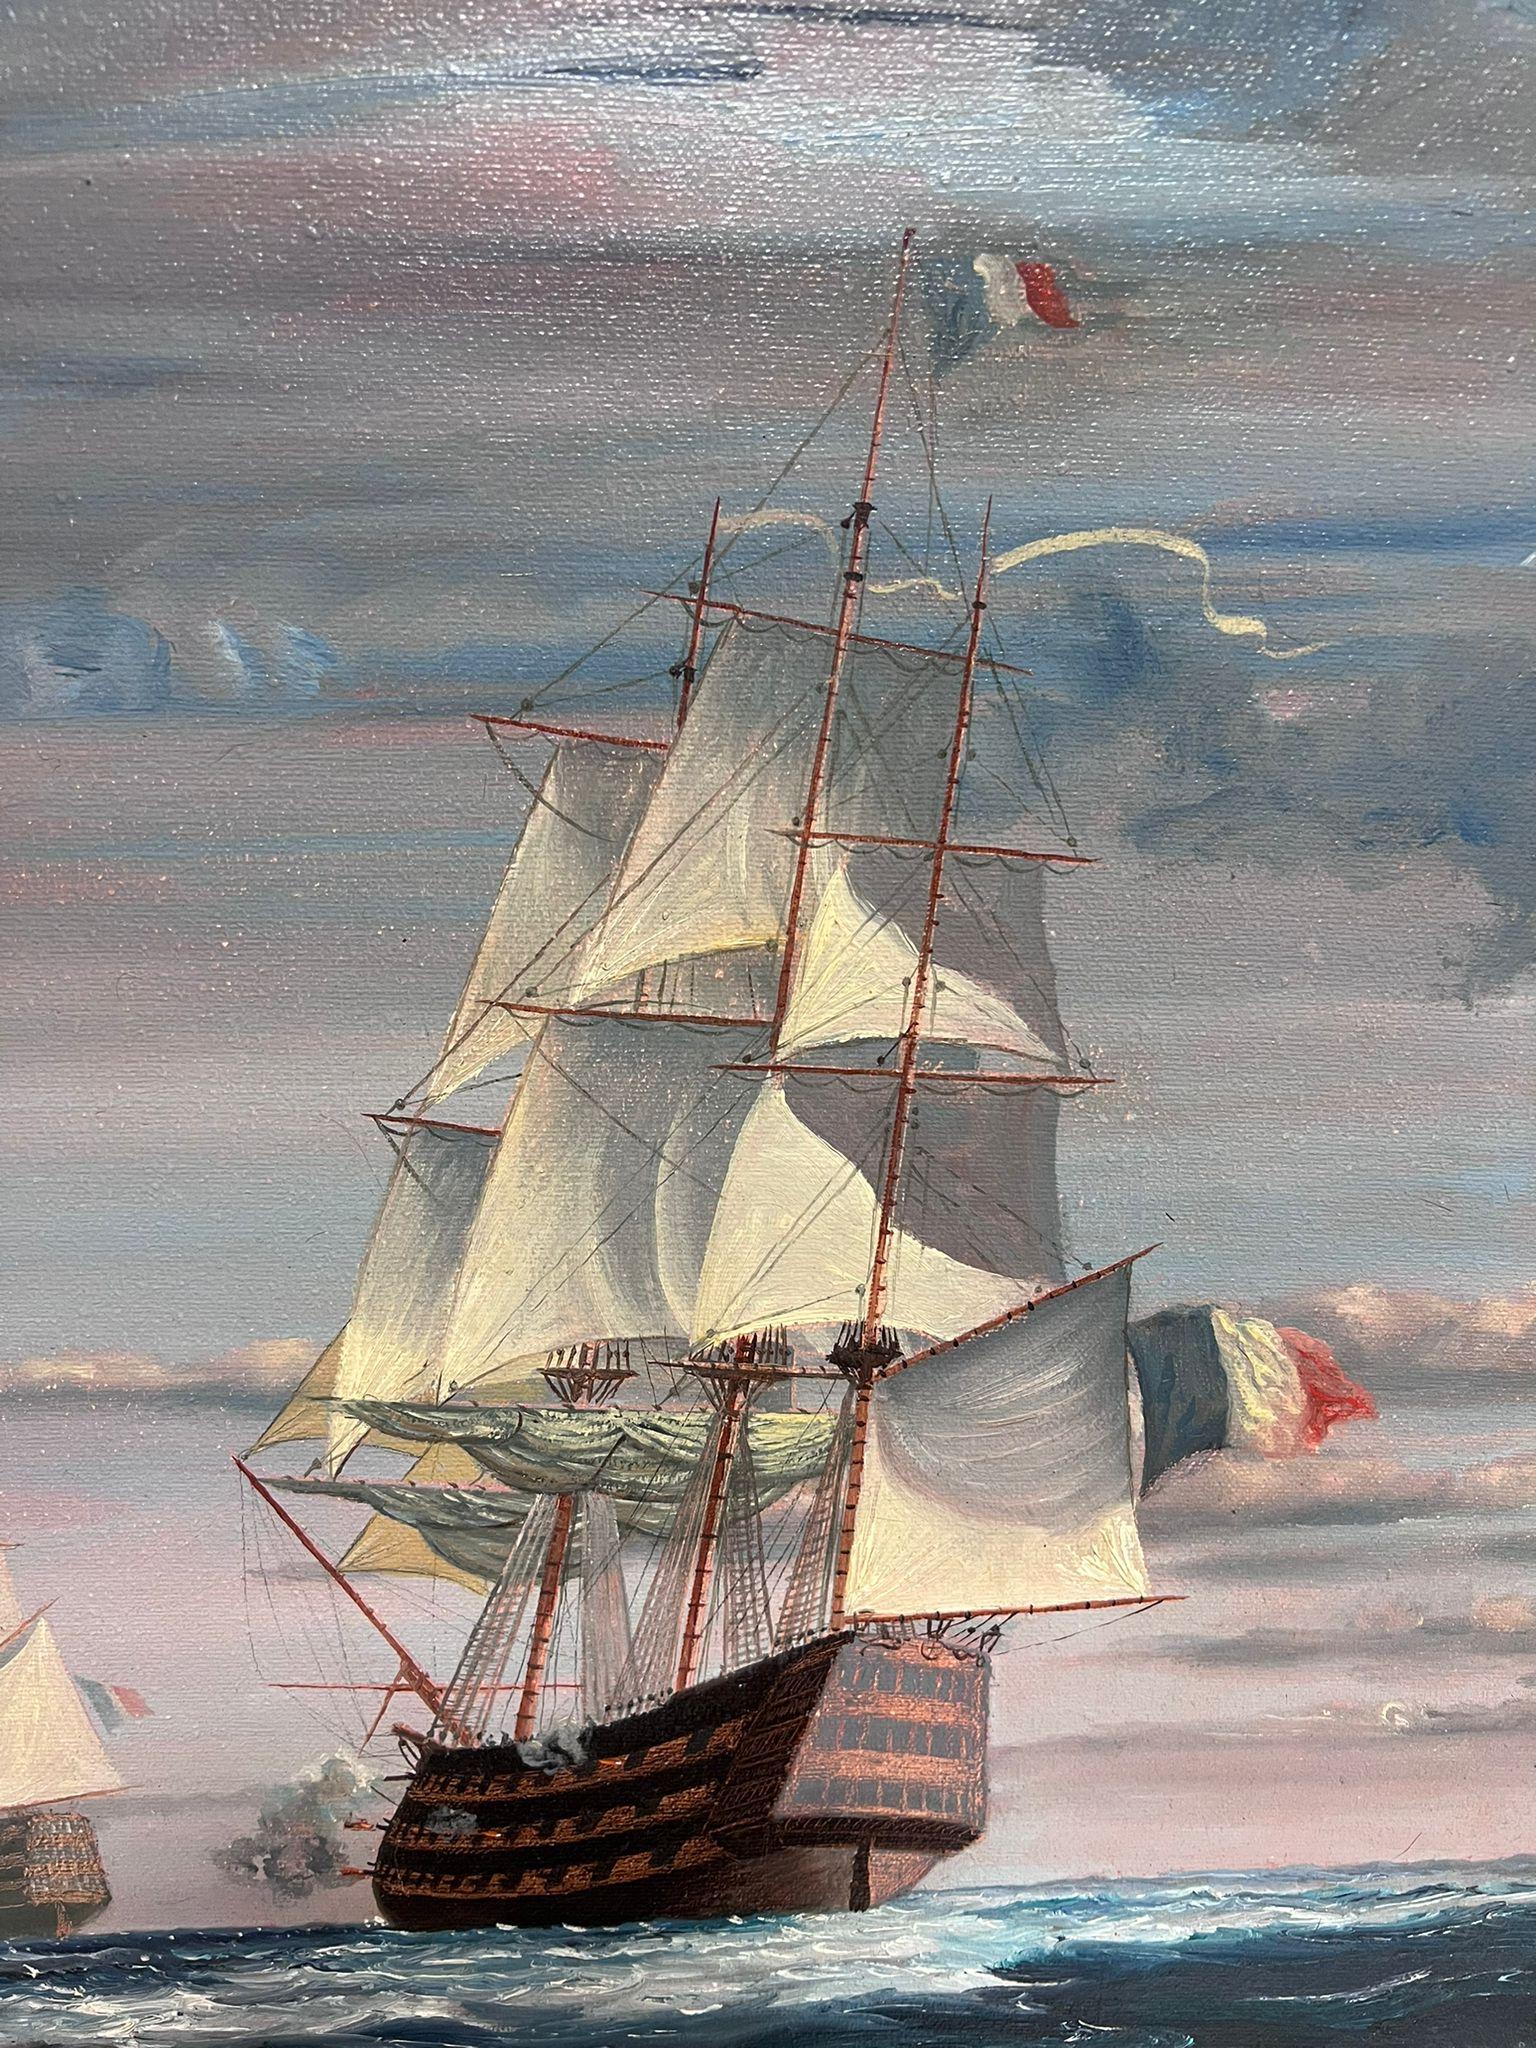 The Naval Engagement at Sea
by Roger John Collins (British 20th century(
signed oil on canvas, framed
framed: 26 x 35.5 inches
canvas: 20 x 30 inches
provenance: private collection, England
condition: very good and sound condition and well presented